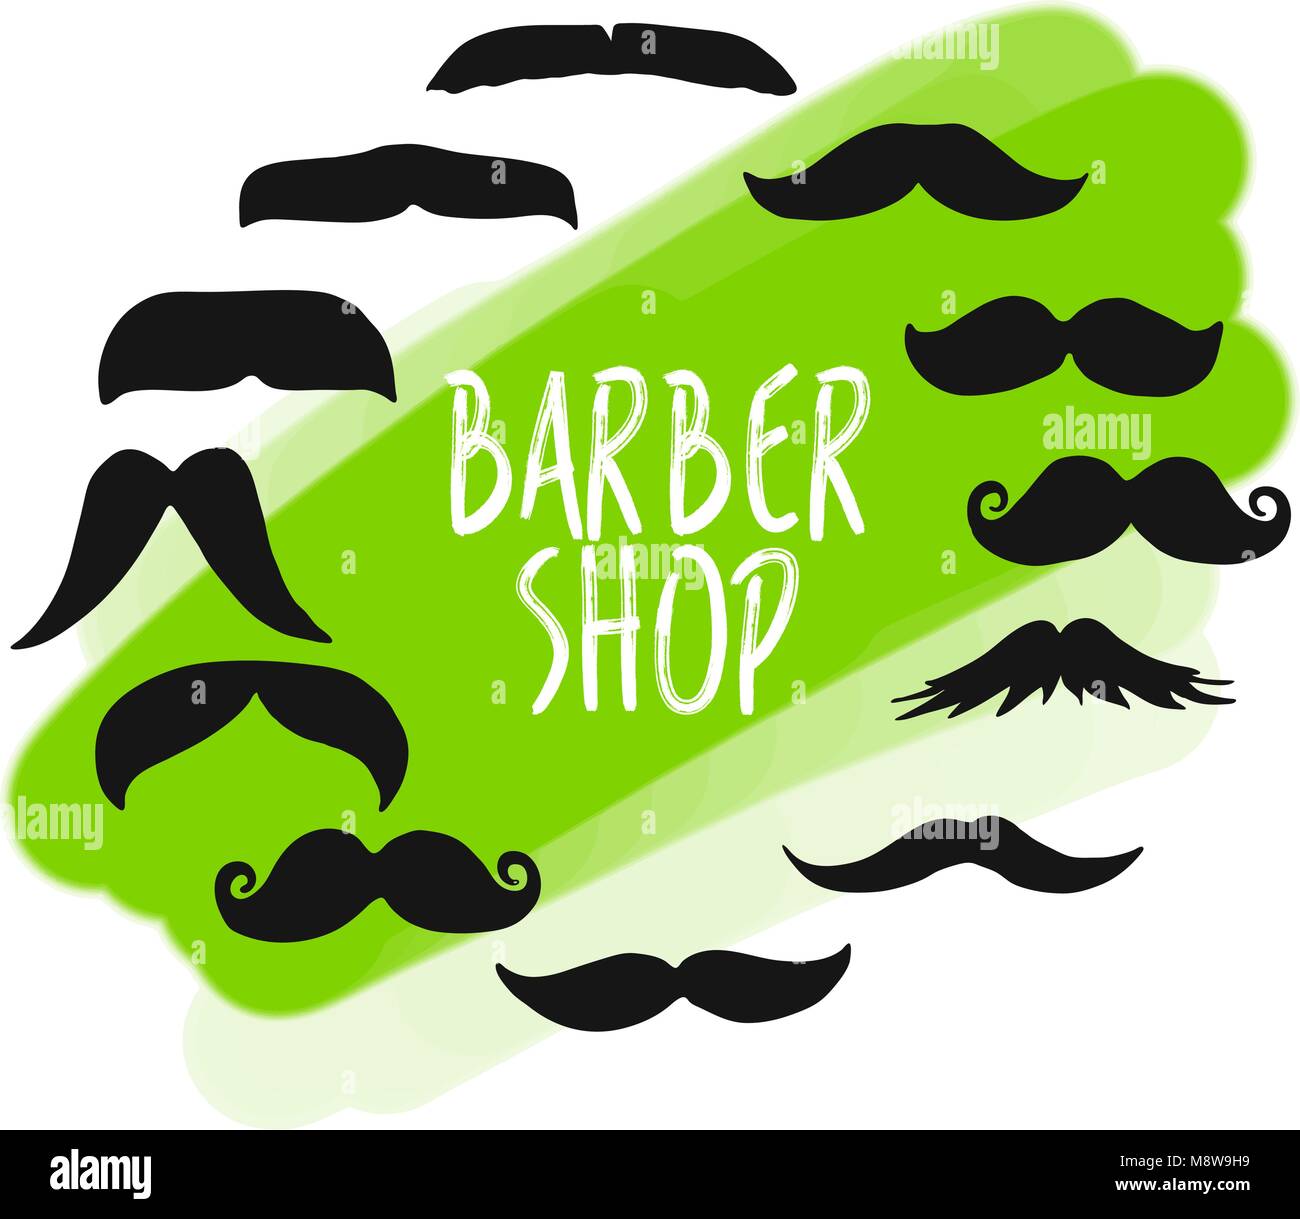 Set of barber shop mustache icons. Business icons for digital marketing and print. Stock Vector